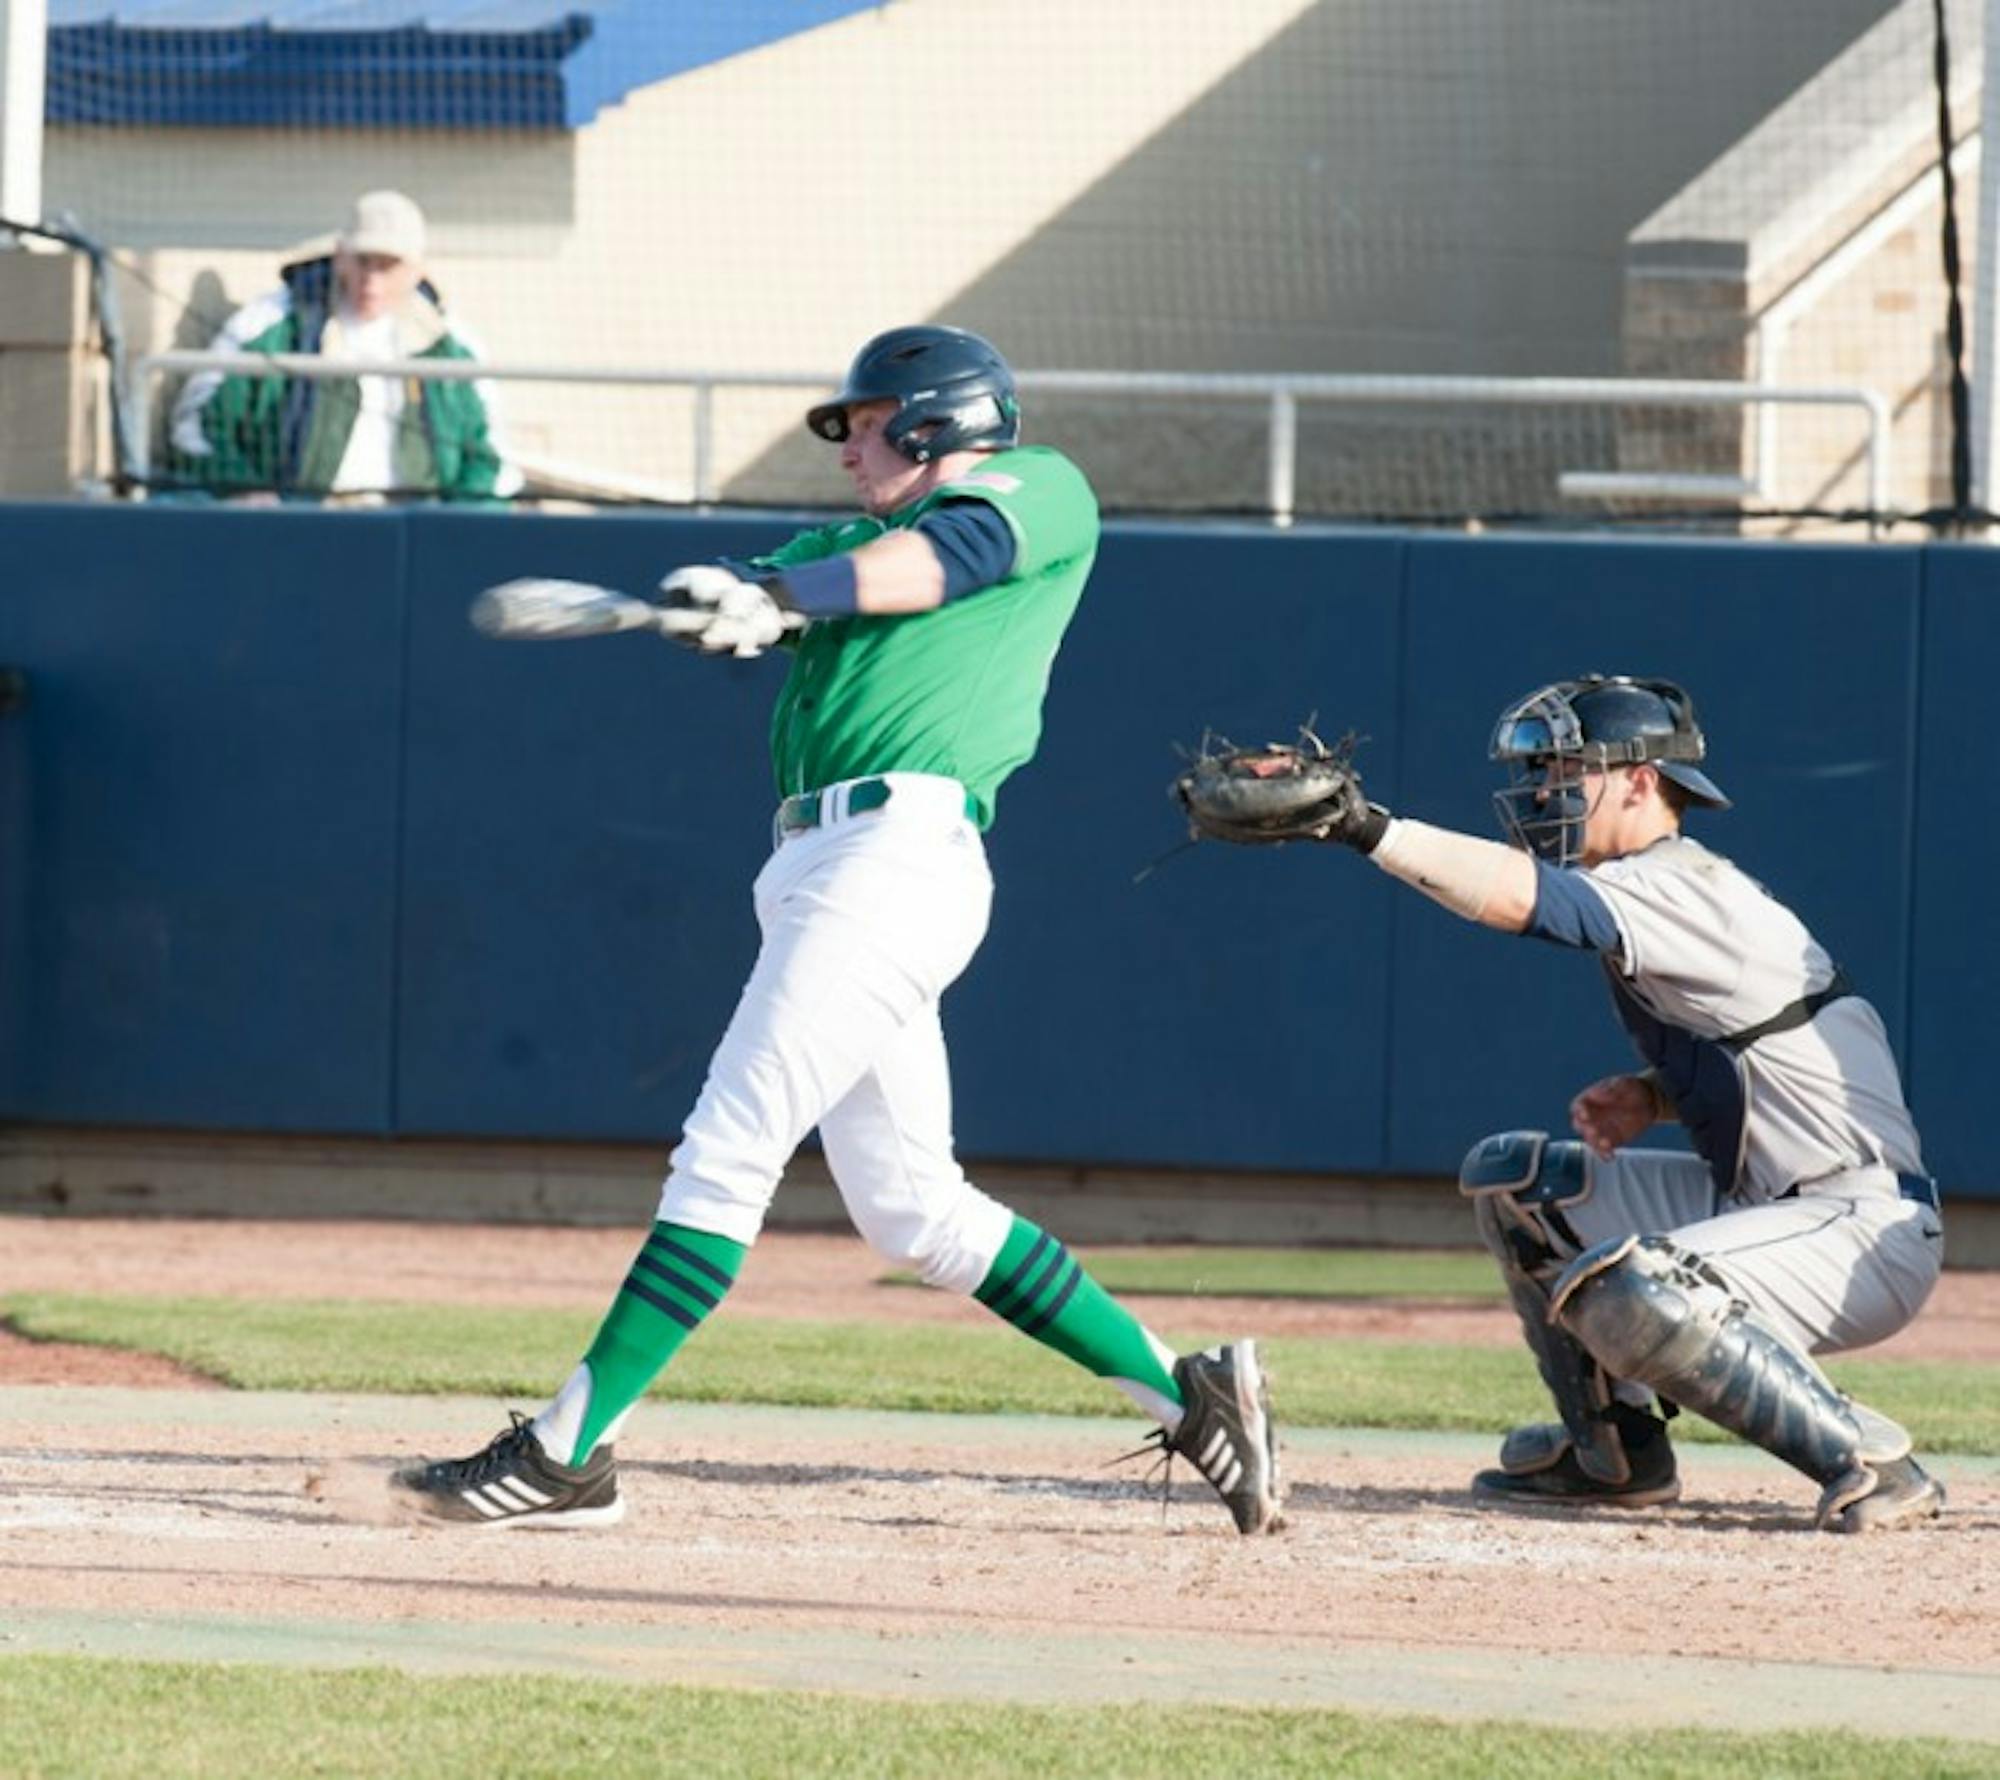 Irish senior catcher Forrest Johnson connects with a pitch during Notre Dame's 12-2 win over Connecticut on April 26, 2013.